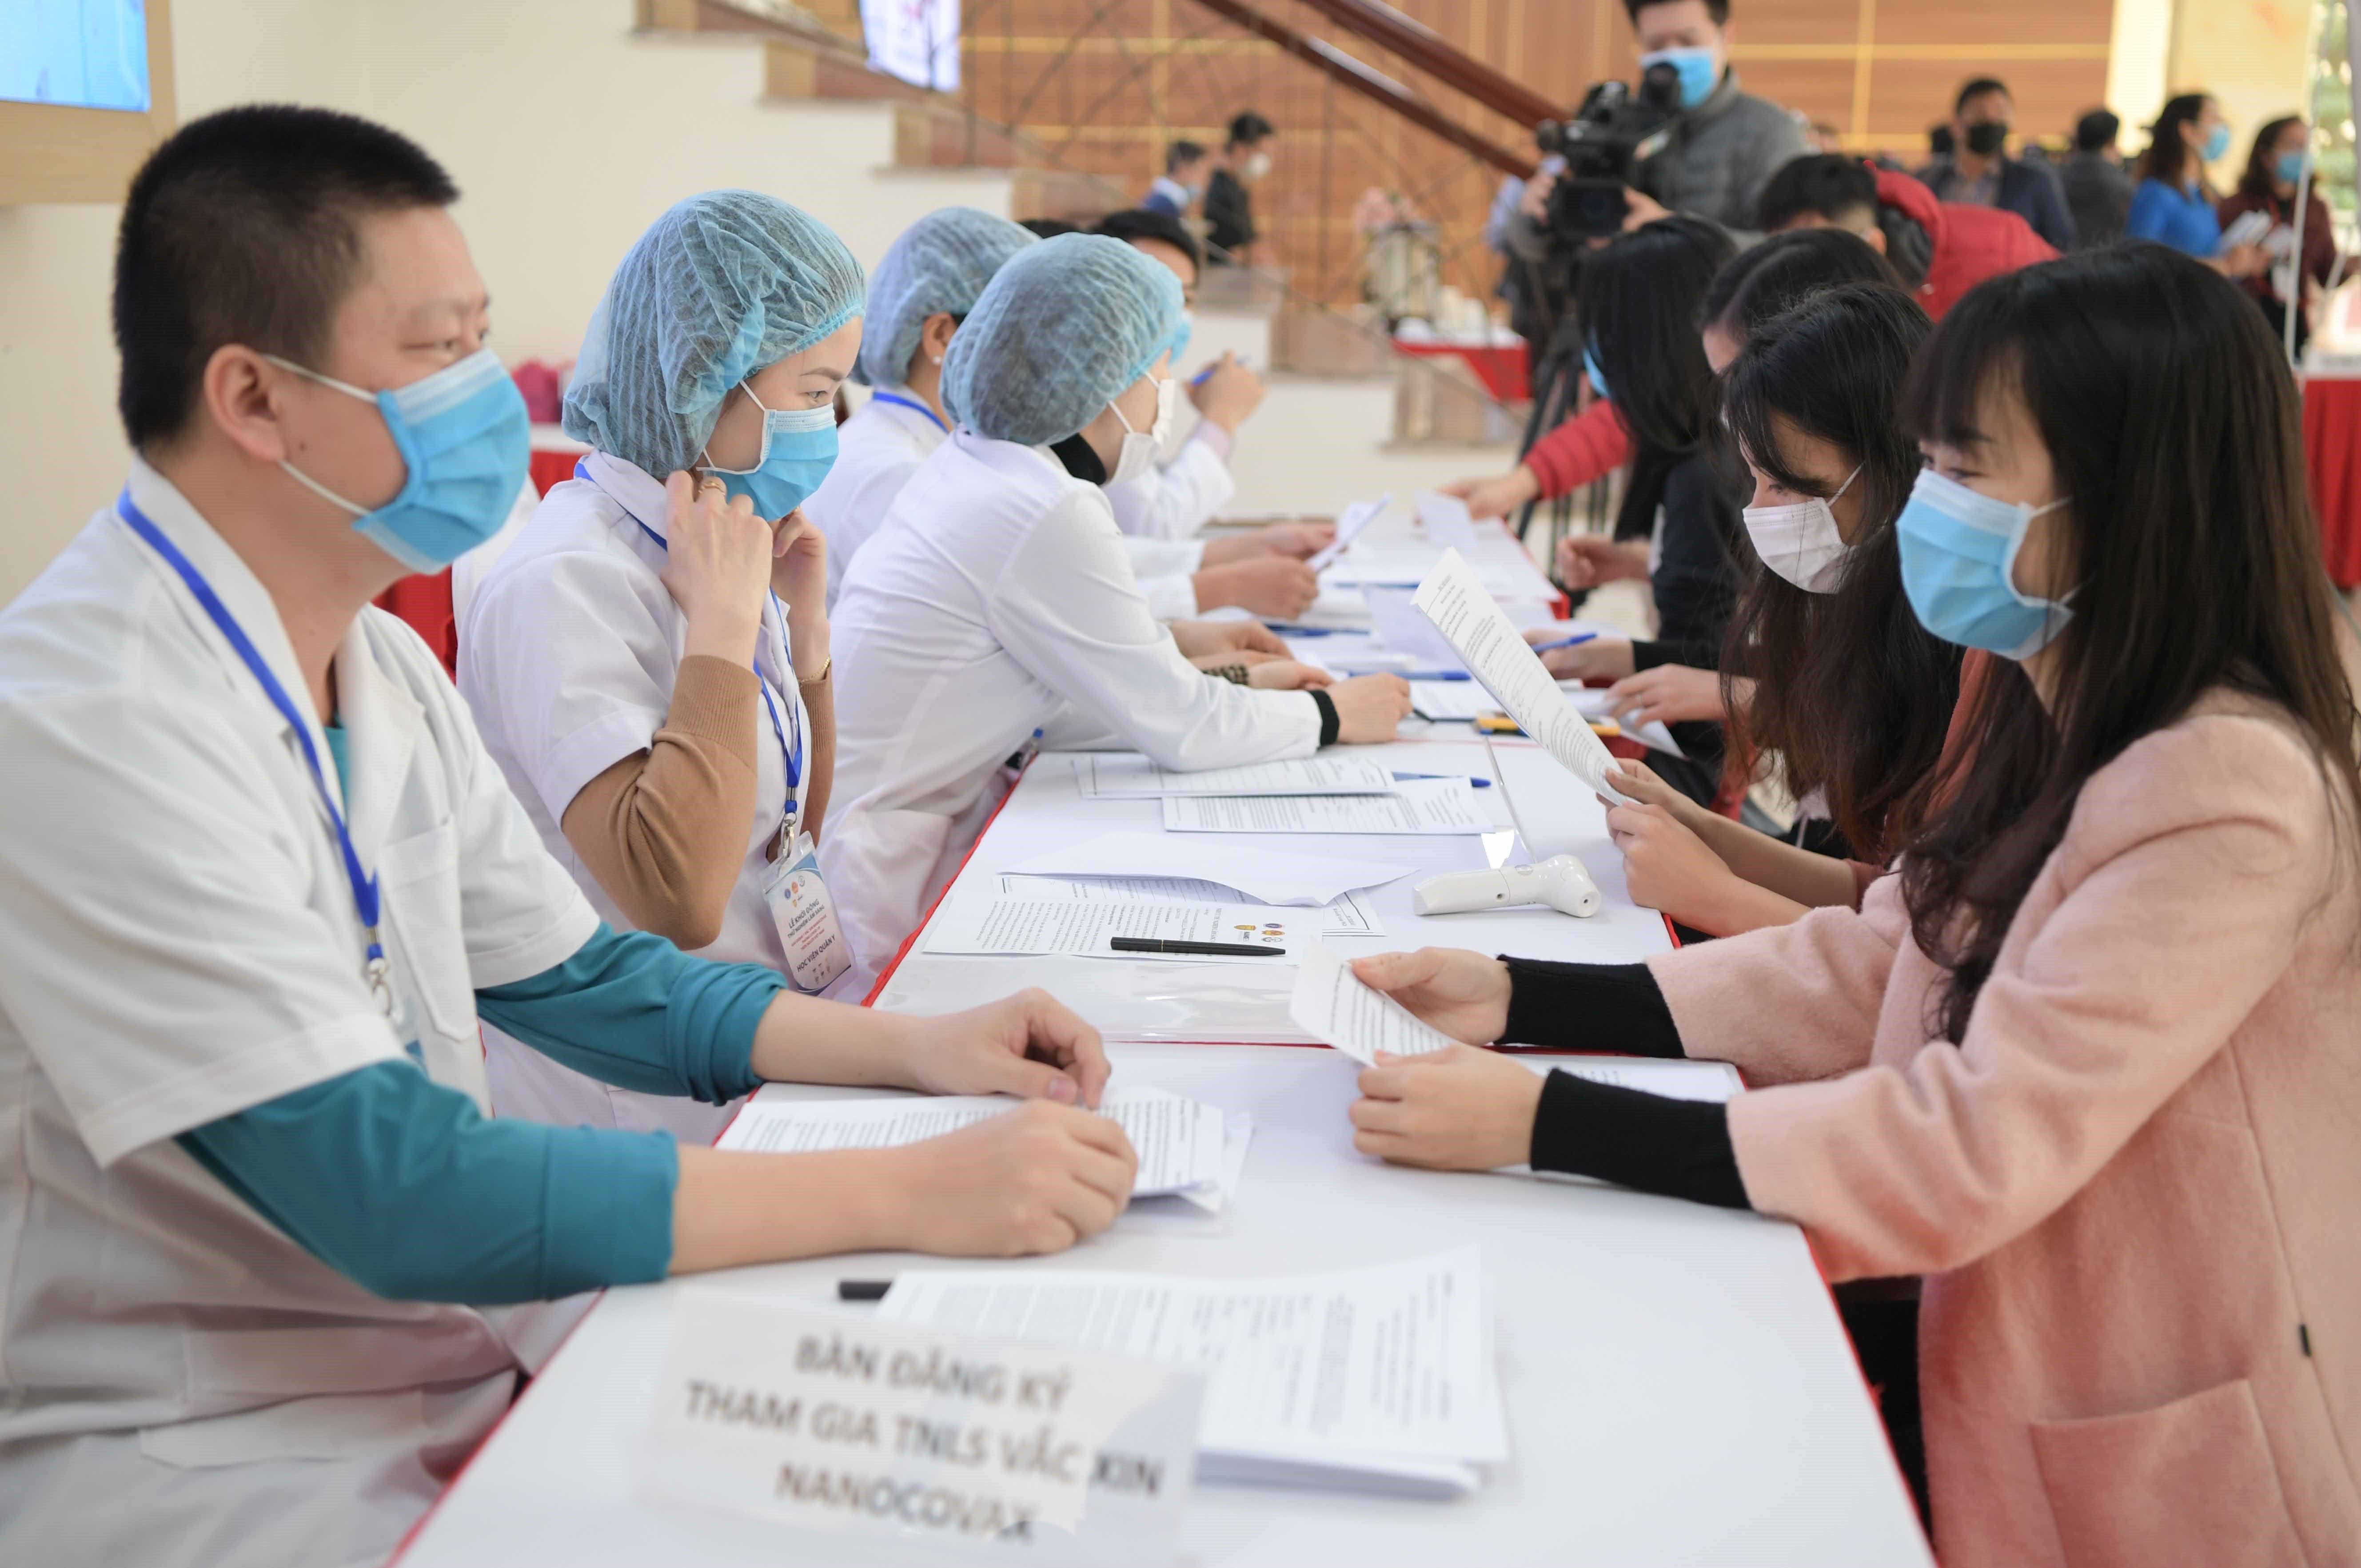 Recruiting volunteers for vaccine trials. The first volunteer received the first shot in the first phase of vaccine trials on December 17 (Photo: VNA)